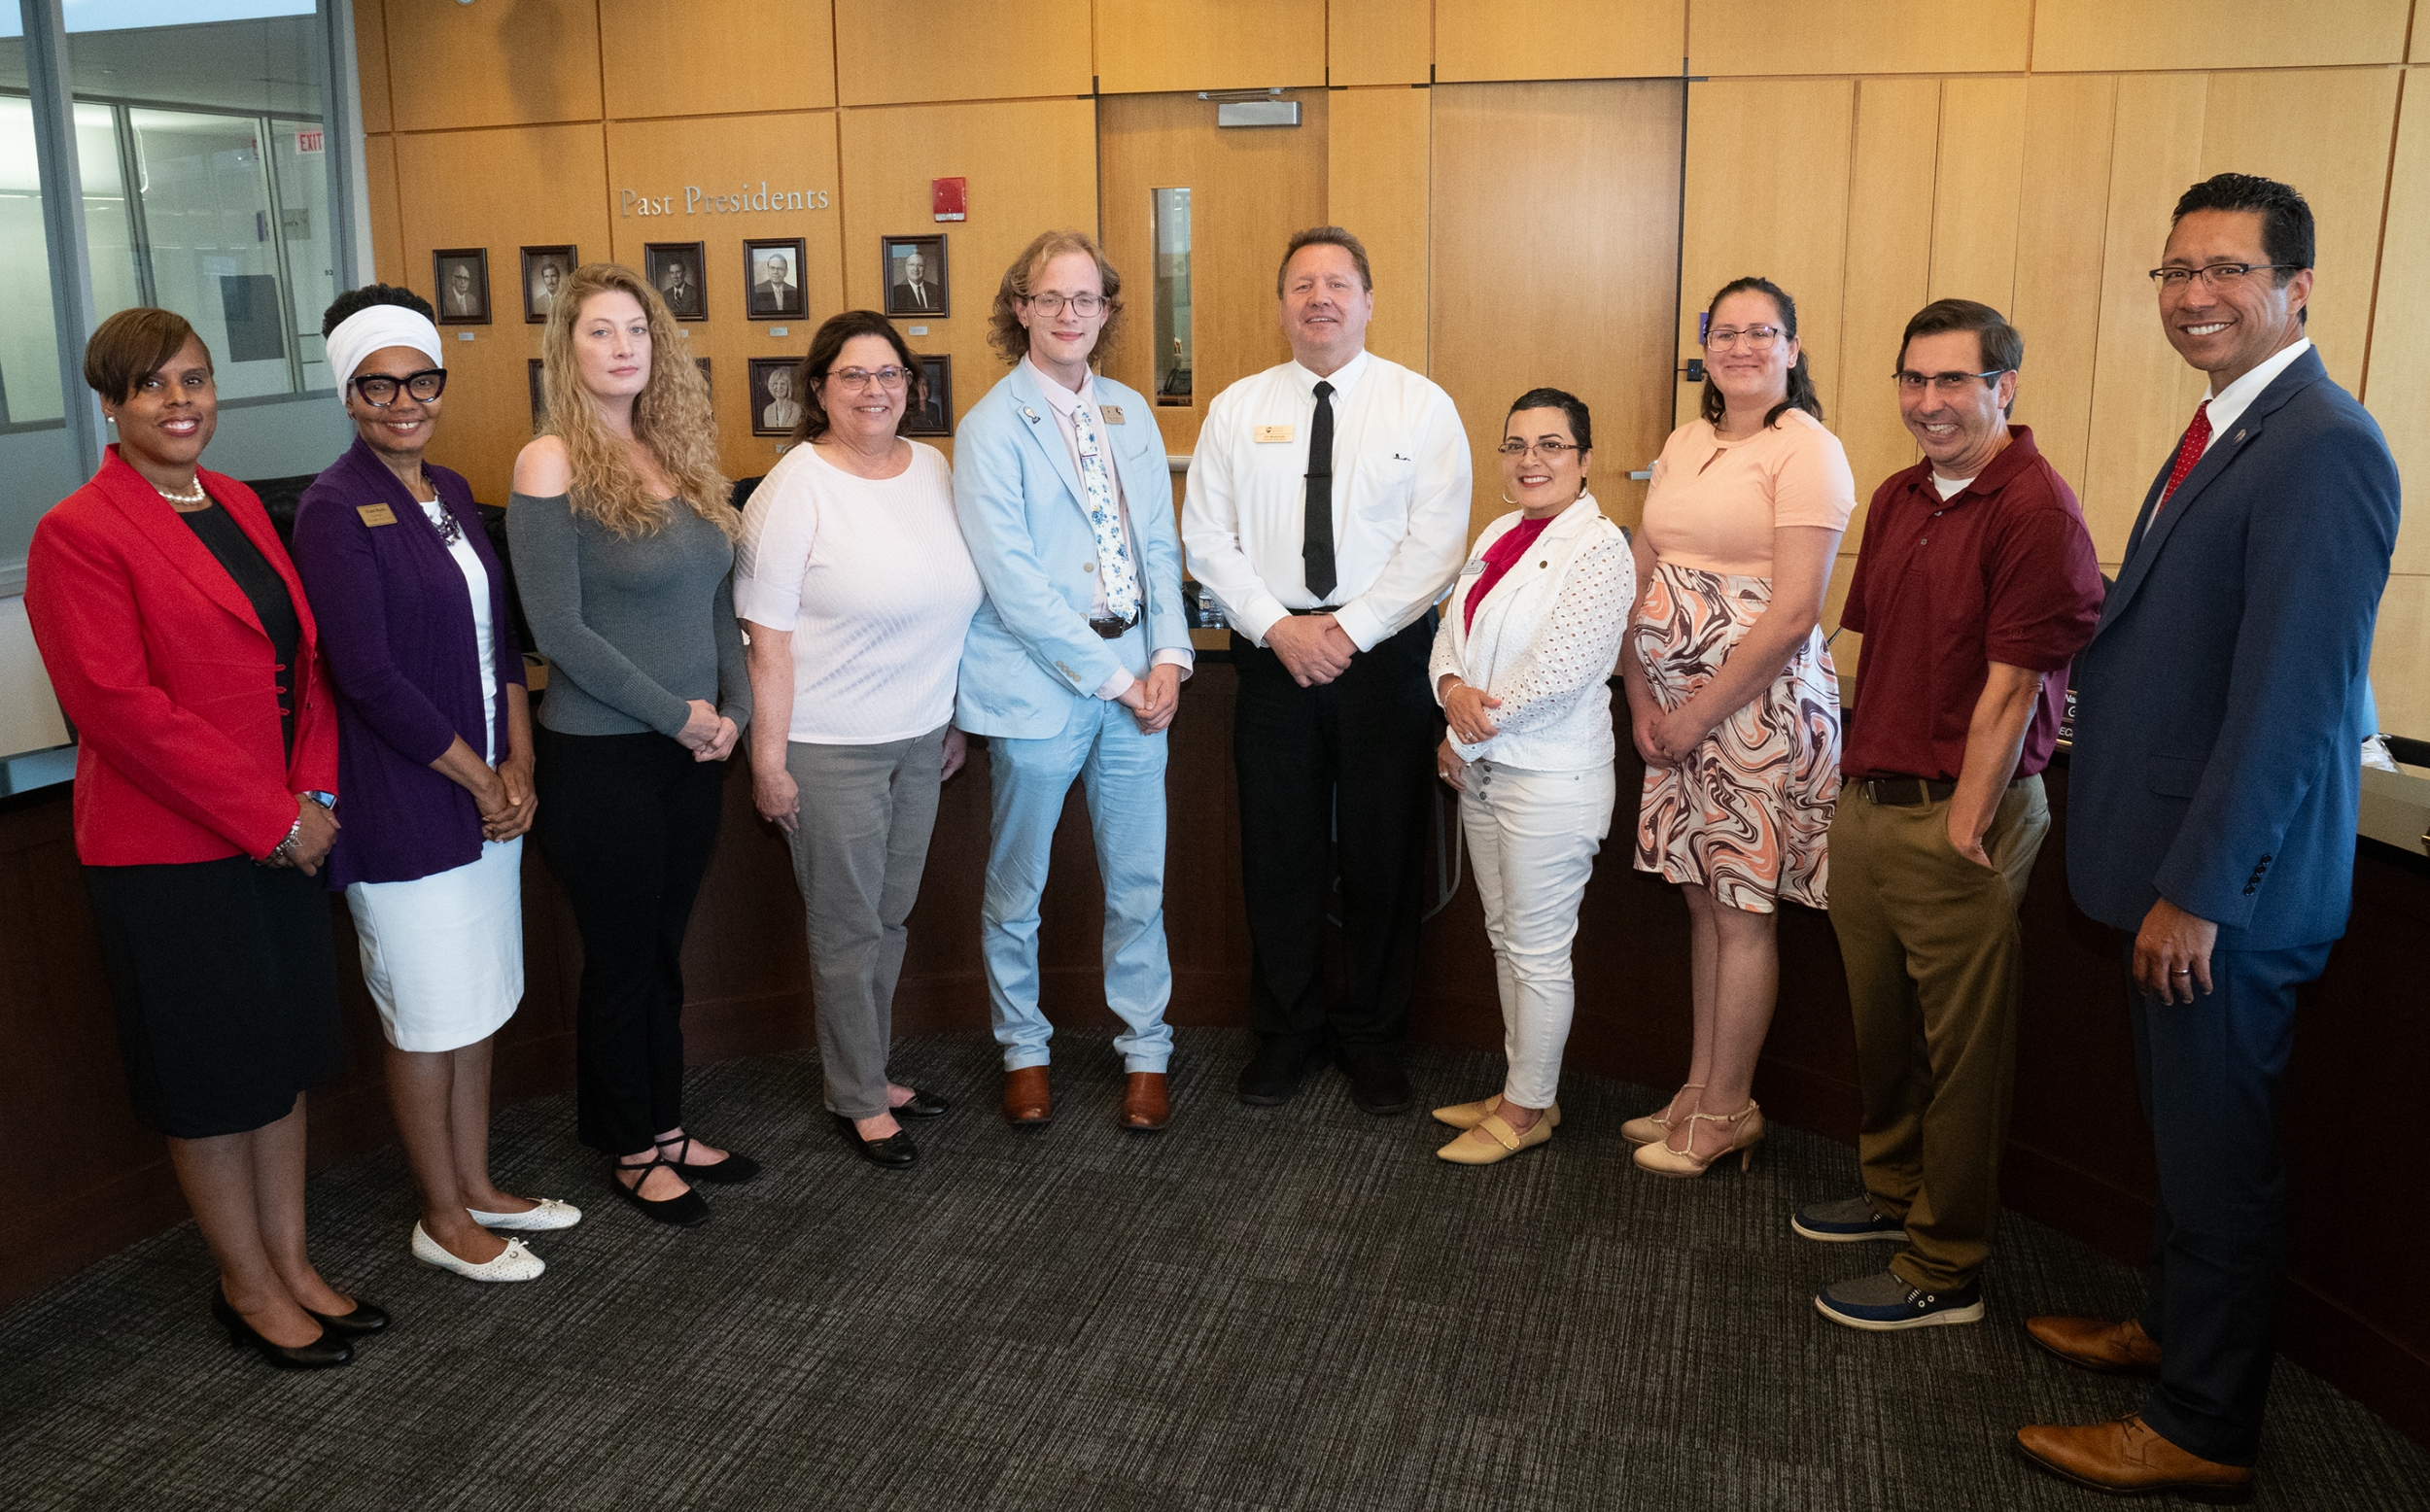 Pictured left to right are Dr. Yolanda Farmer, Diane Harris, Michelle Lee, Maureen Broderick, Ryan Queeney, James Budzinski, Nancy Garcia Guillen, Alicia Morales, Jake Mahalik and Dr. Clyne Namuo as they pose for photo in JJC board room